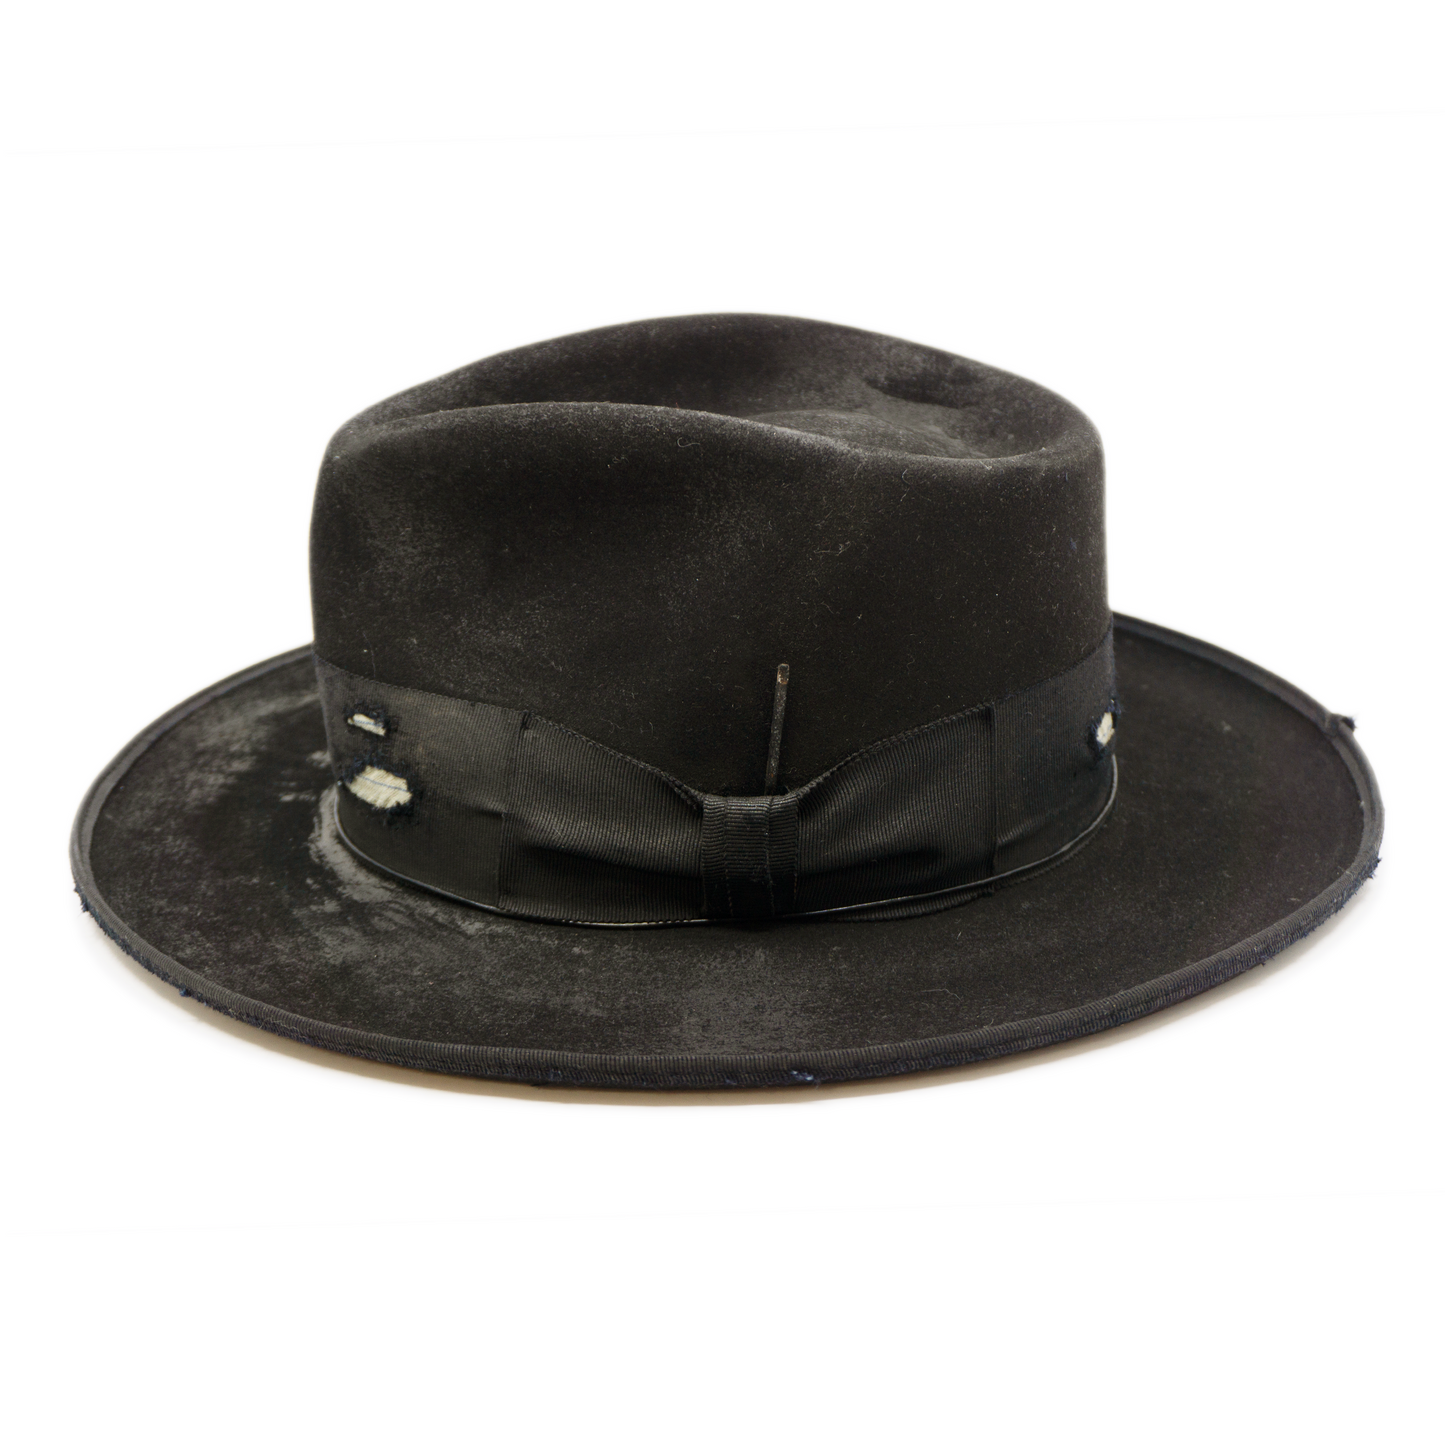 100% felt hat in Blackout  Western  Weight    2” distressed double layered band and bow  Distressed   Engraved NF silver matchstick   Holder in leather pocket   12mm distressed binding  Pencil curled  brim  Made in USA